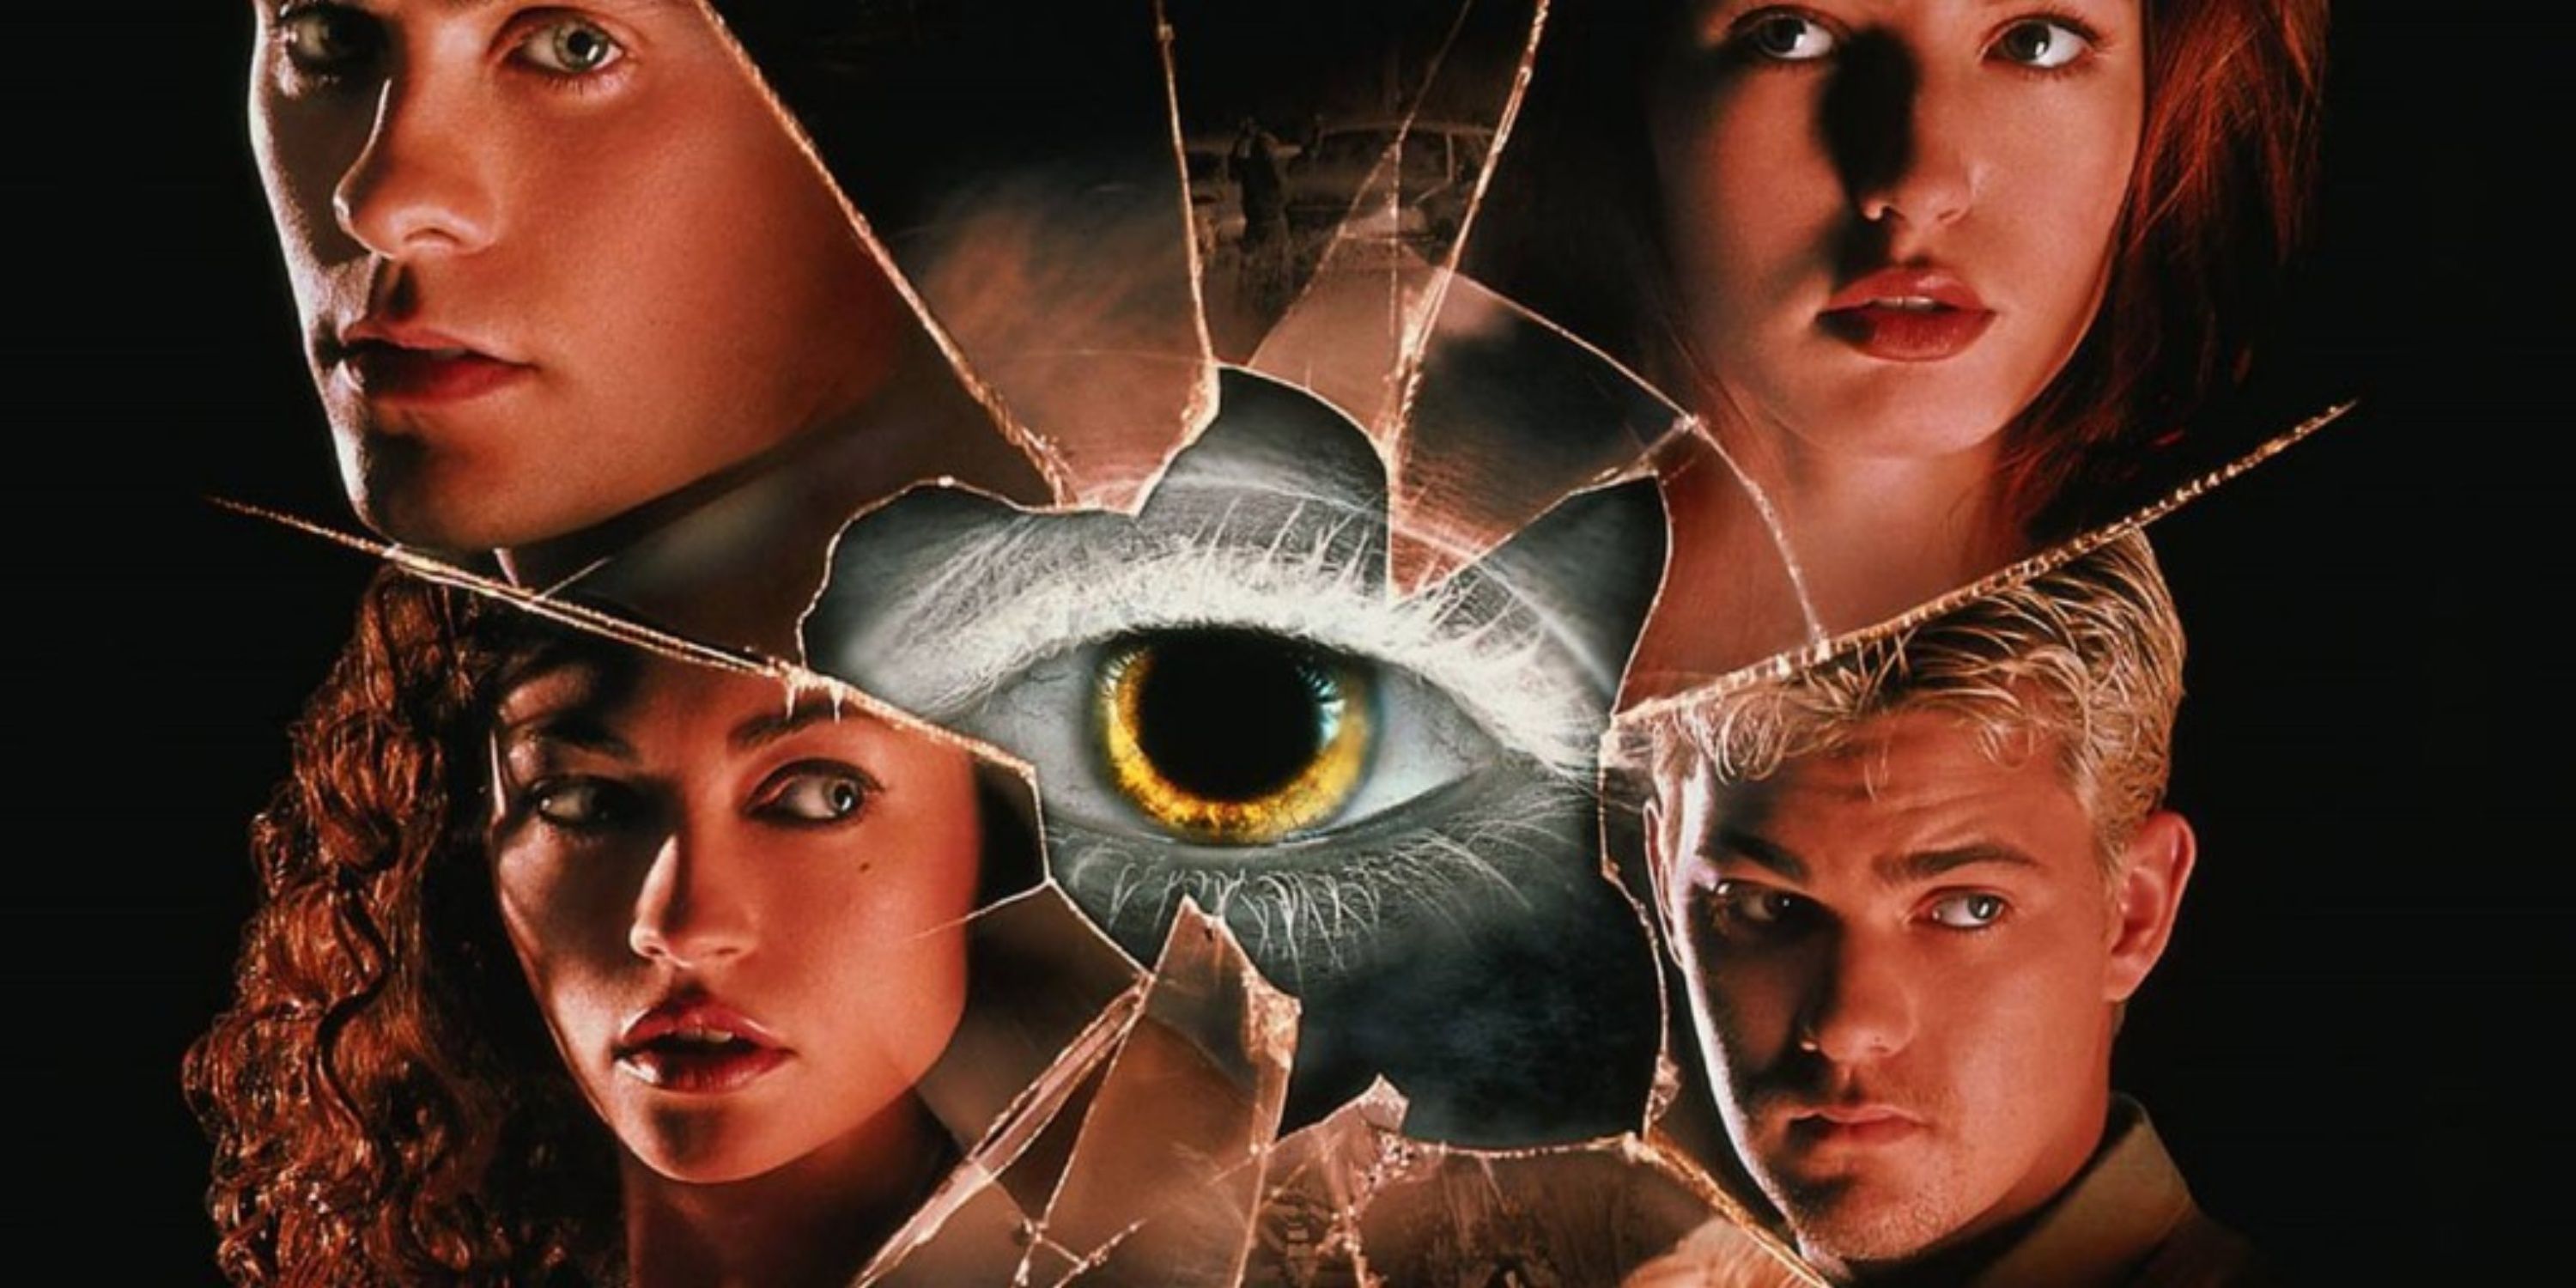 Feature image for characters in Urban Legend 1998 in cracked glass